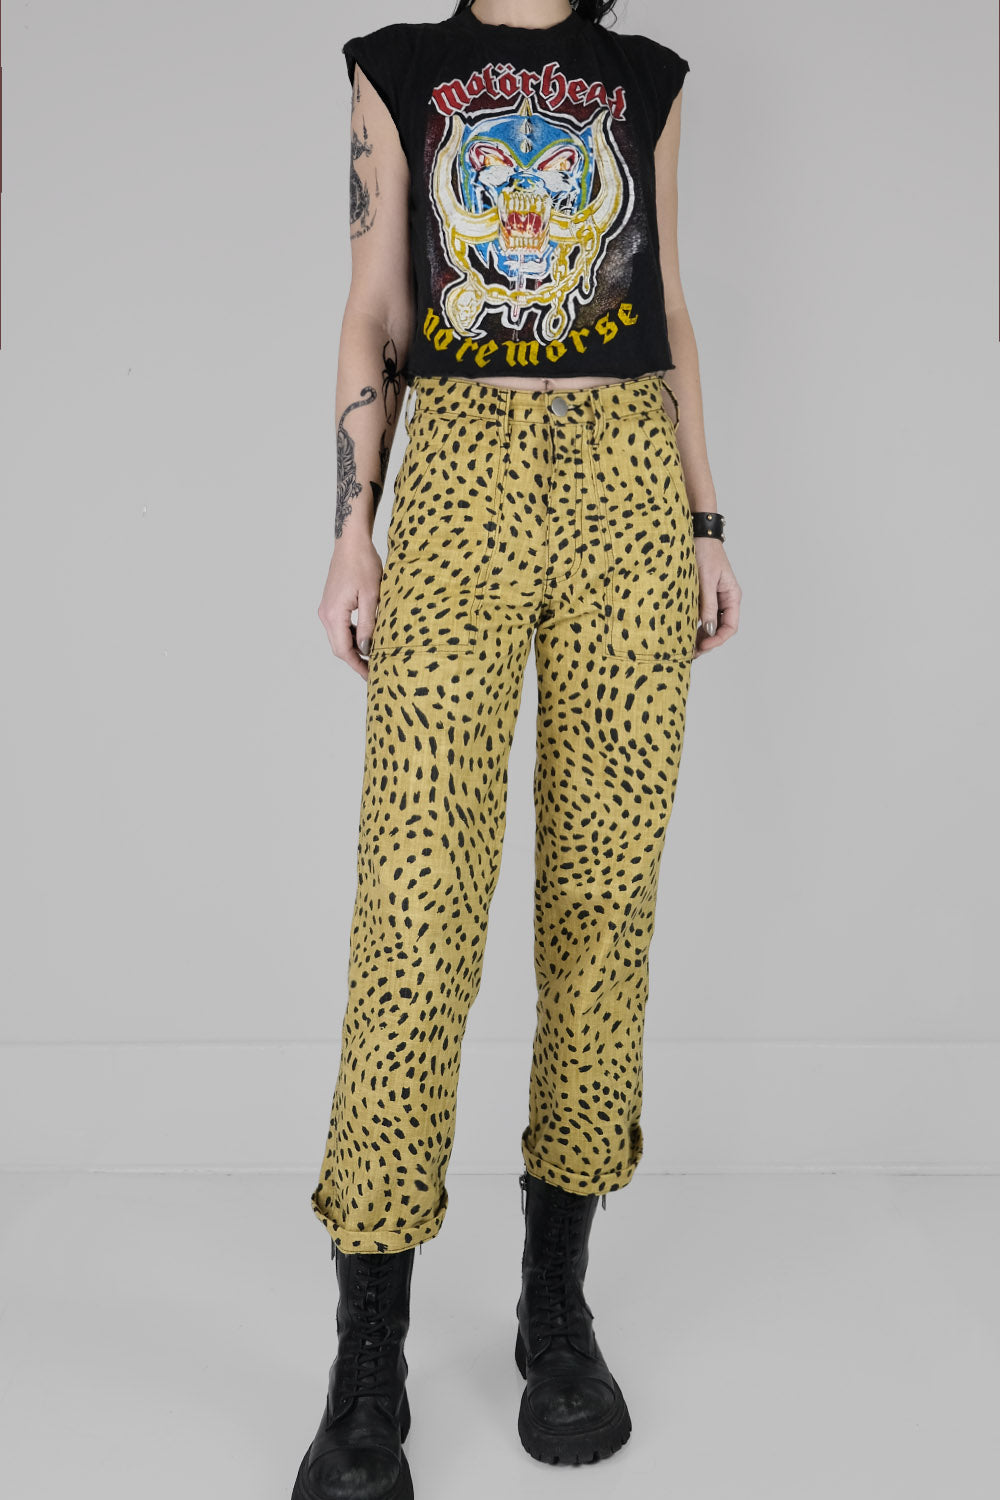 FLASH SALE! OG-107 Utility Pants in Cheetah Print | Made To Order